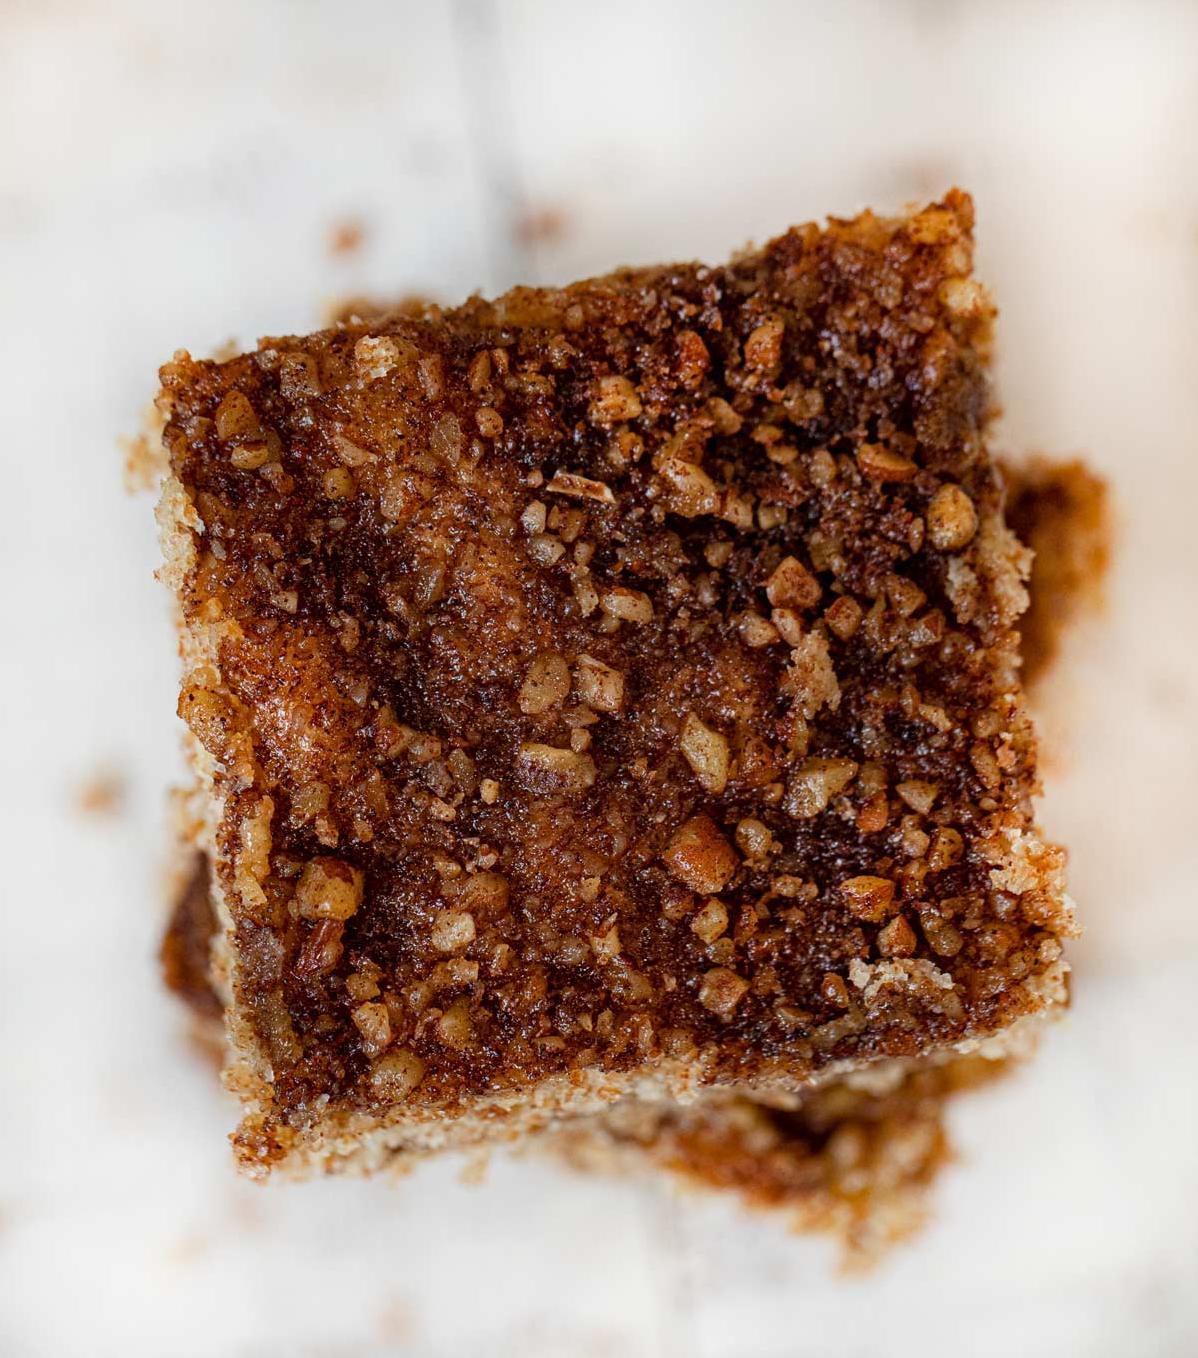  Ready to mix and bake your way to a delicious coffee cake with whole wheat flour?